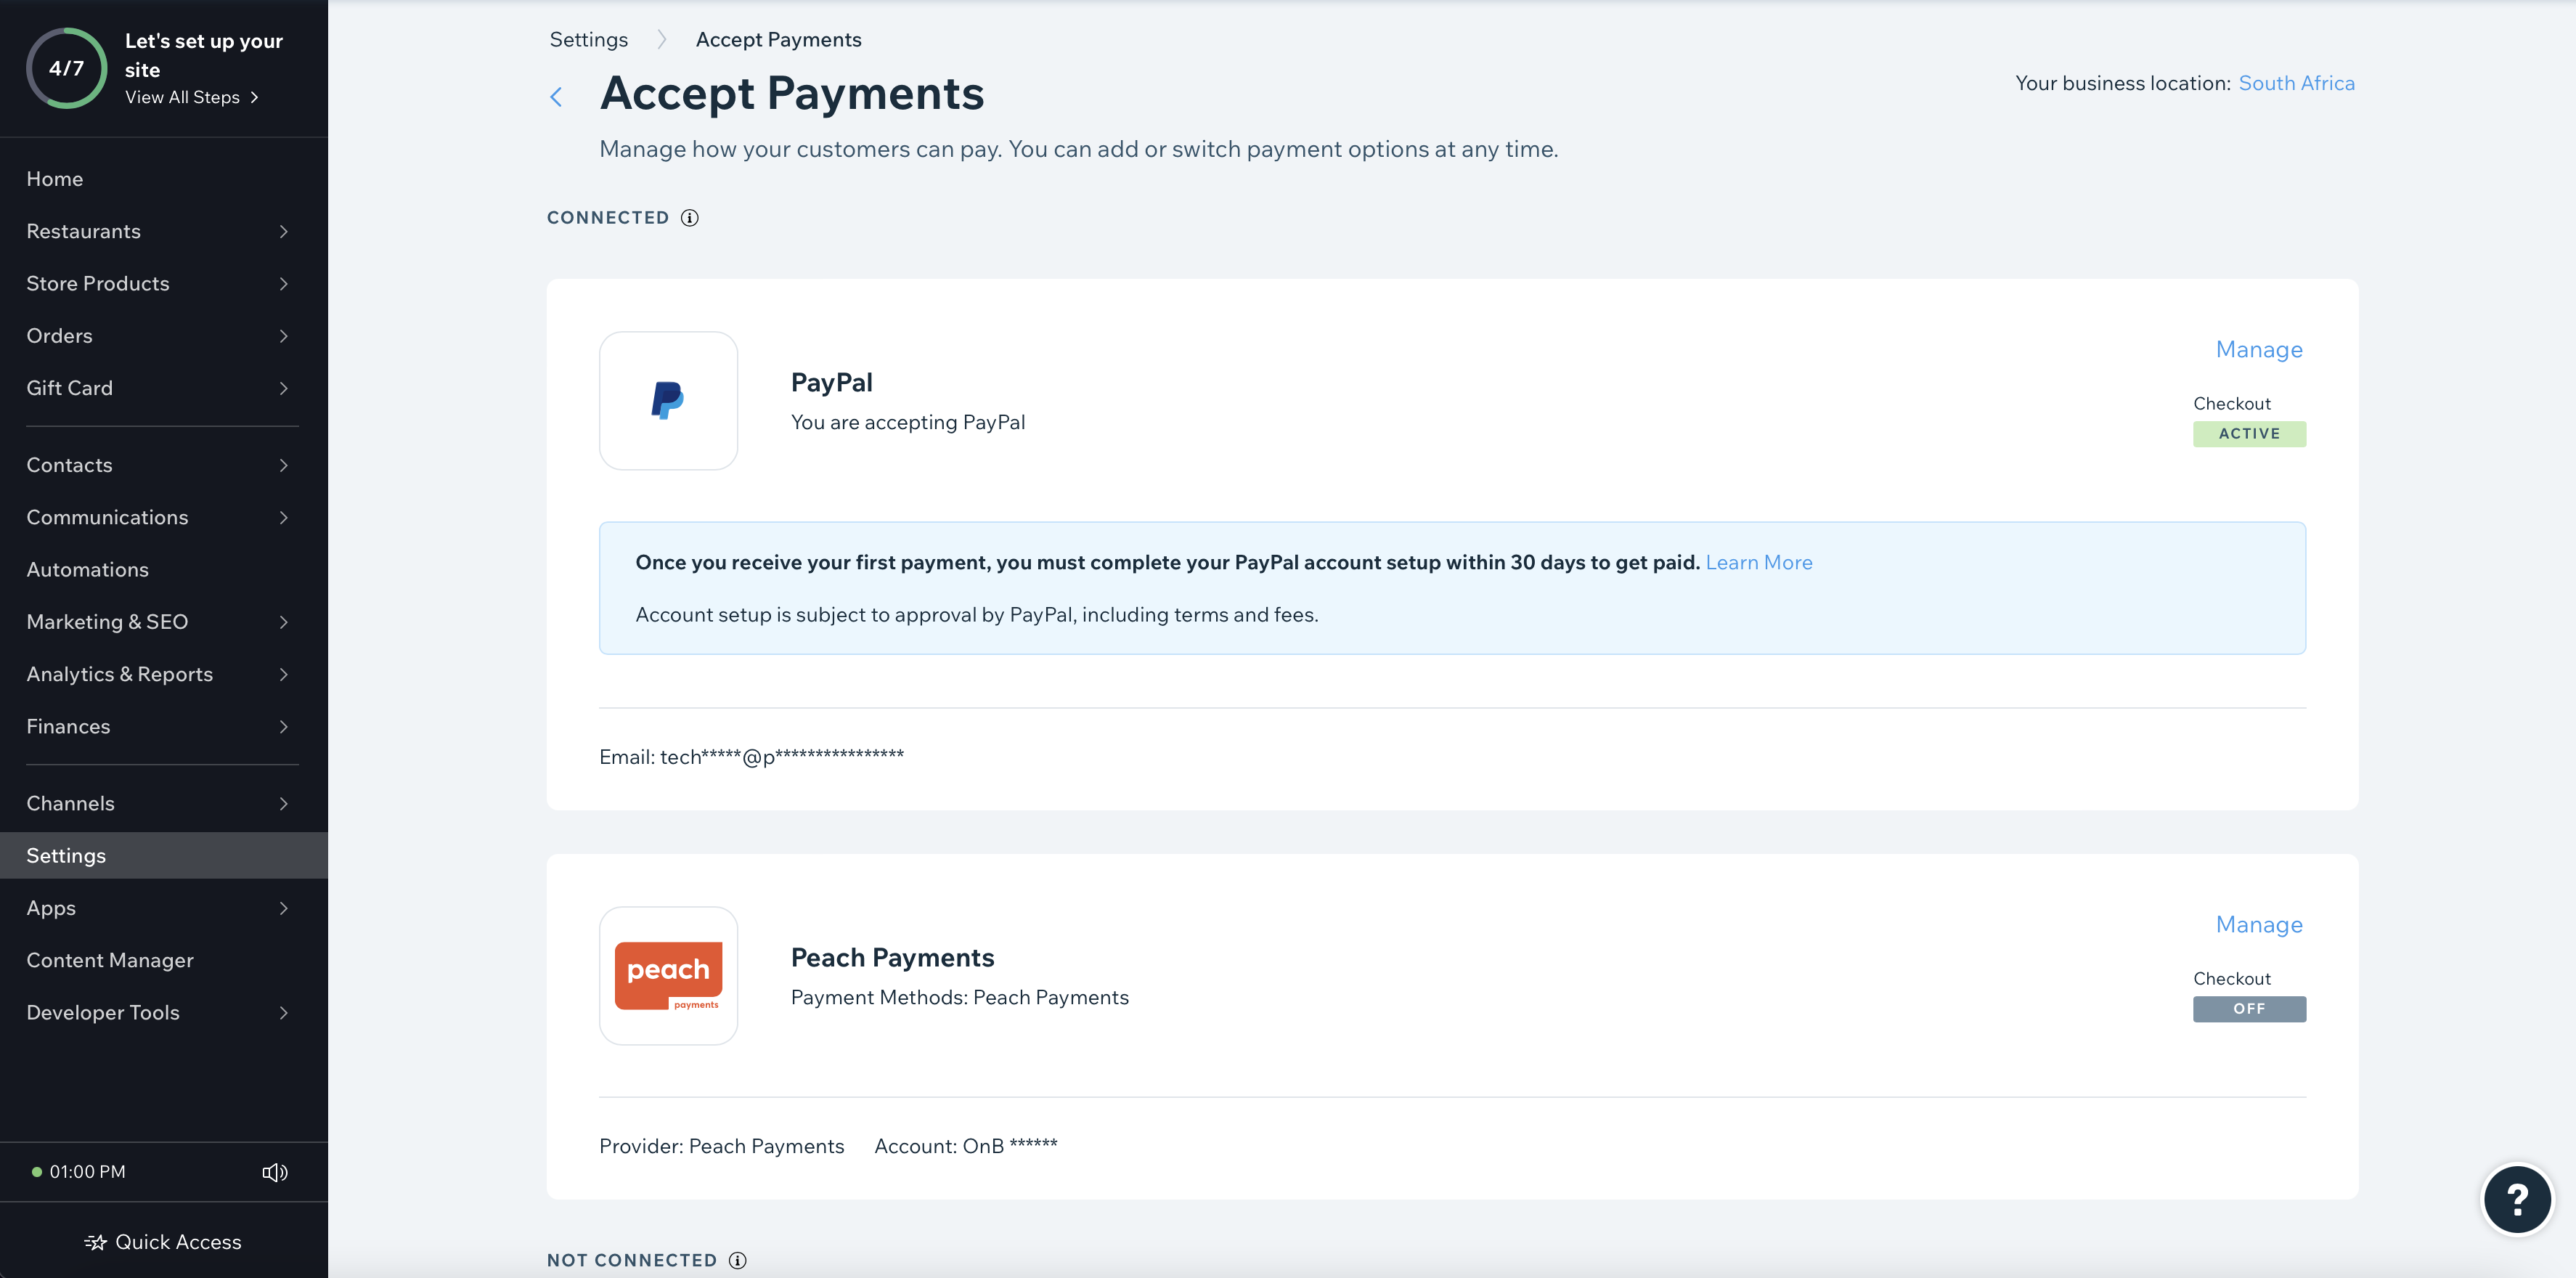 Manage Peach Payments